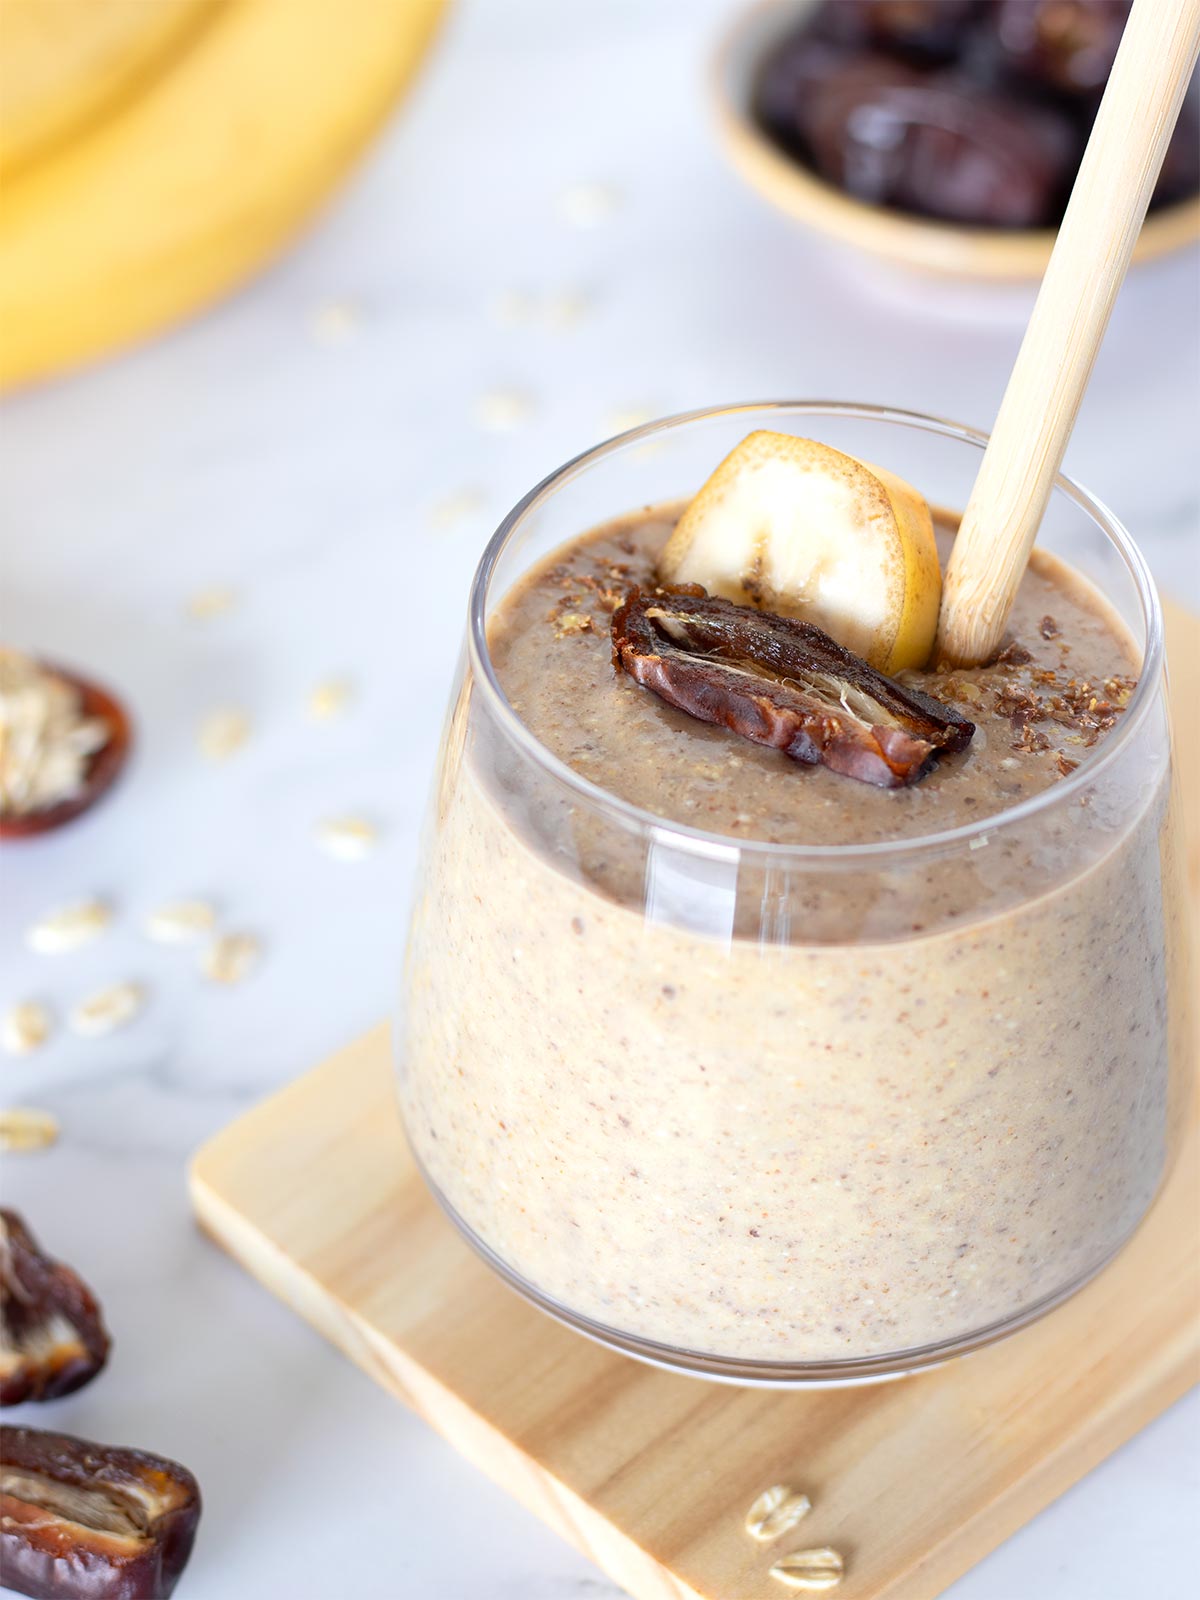 Healthy smoothie with dates, banana, oats and peanut butter for pregnancy and labor.